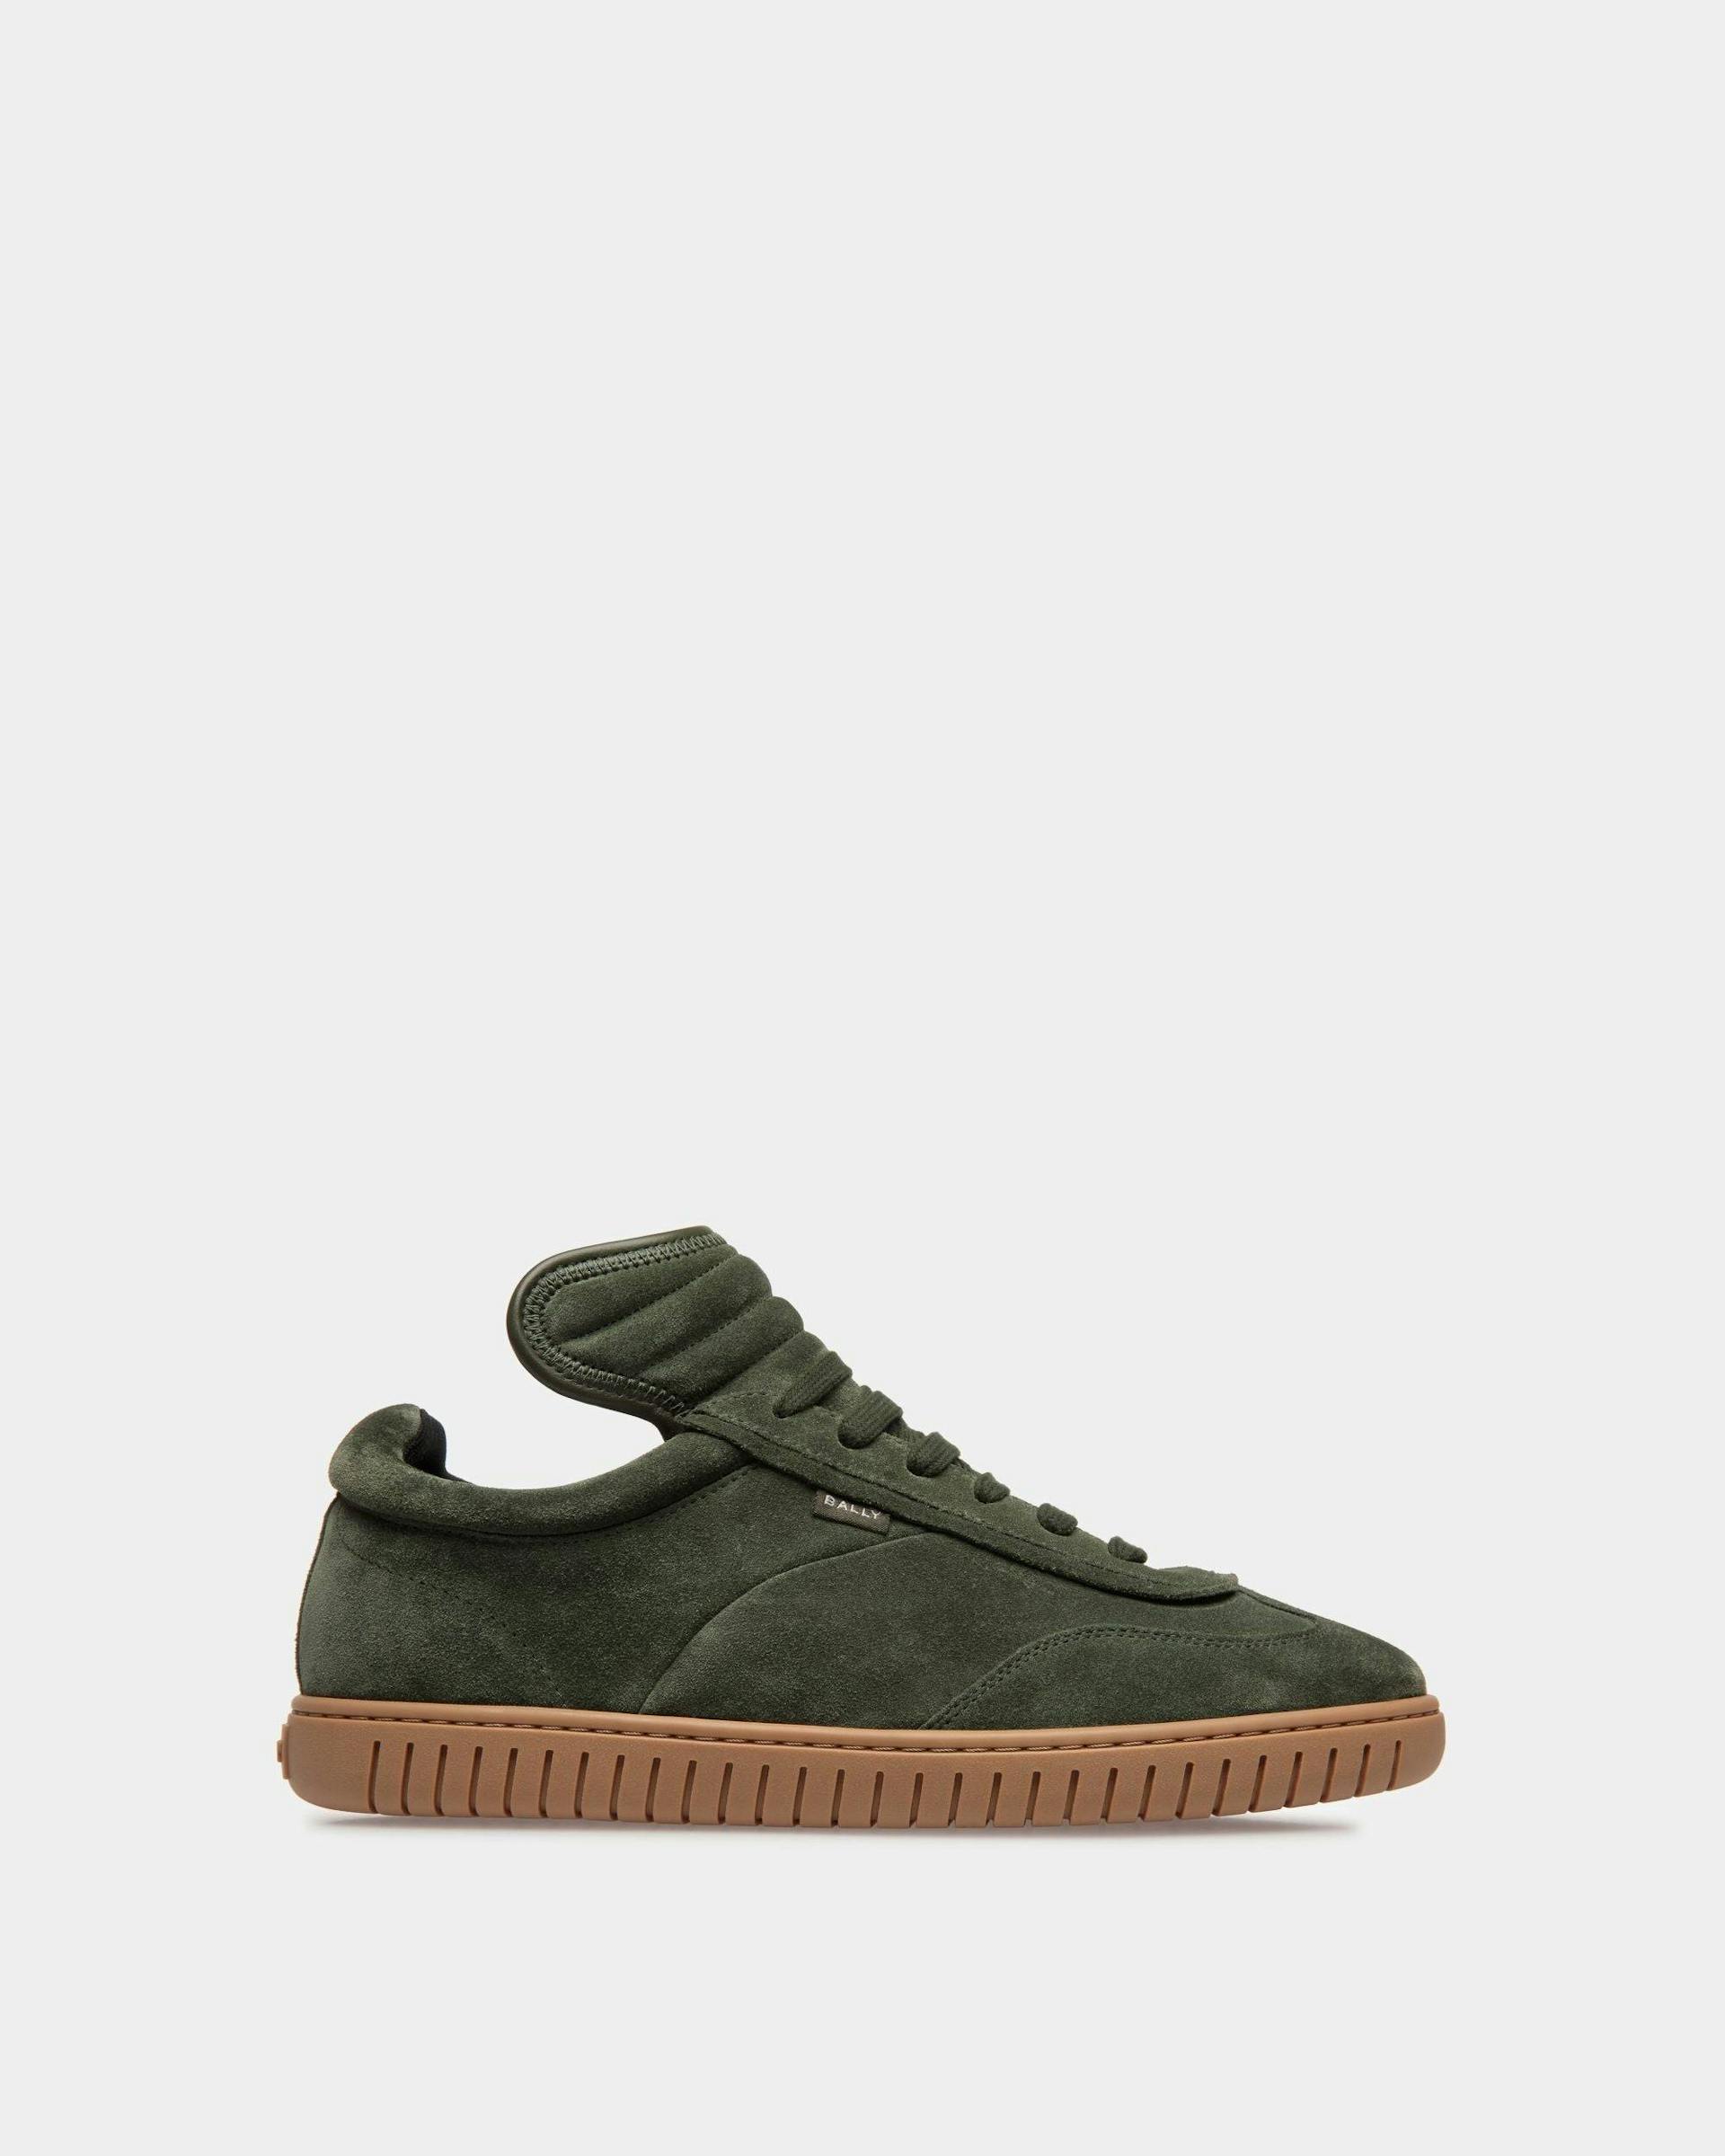 Player Sneakers In Green And Amber Leather - Men's - Bally - 01